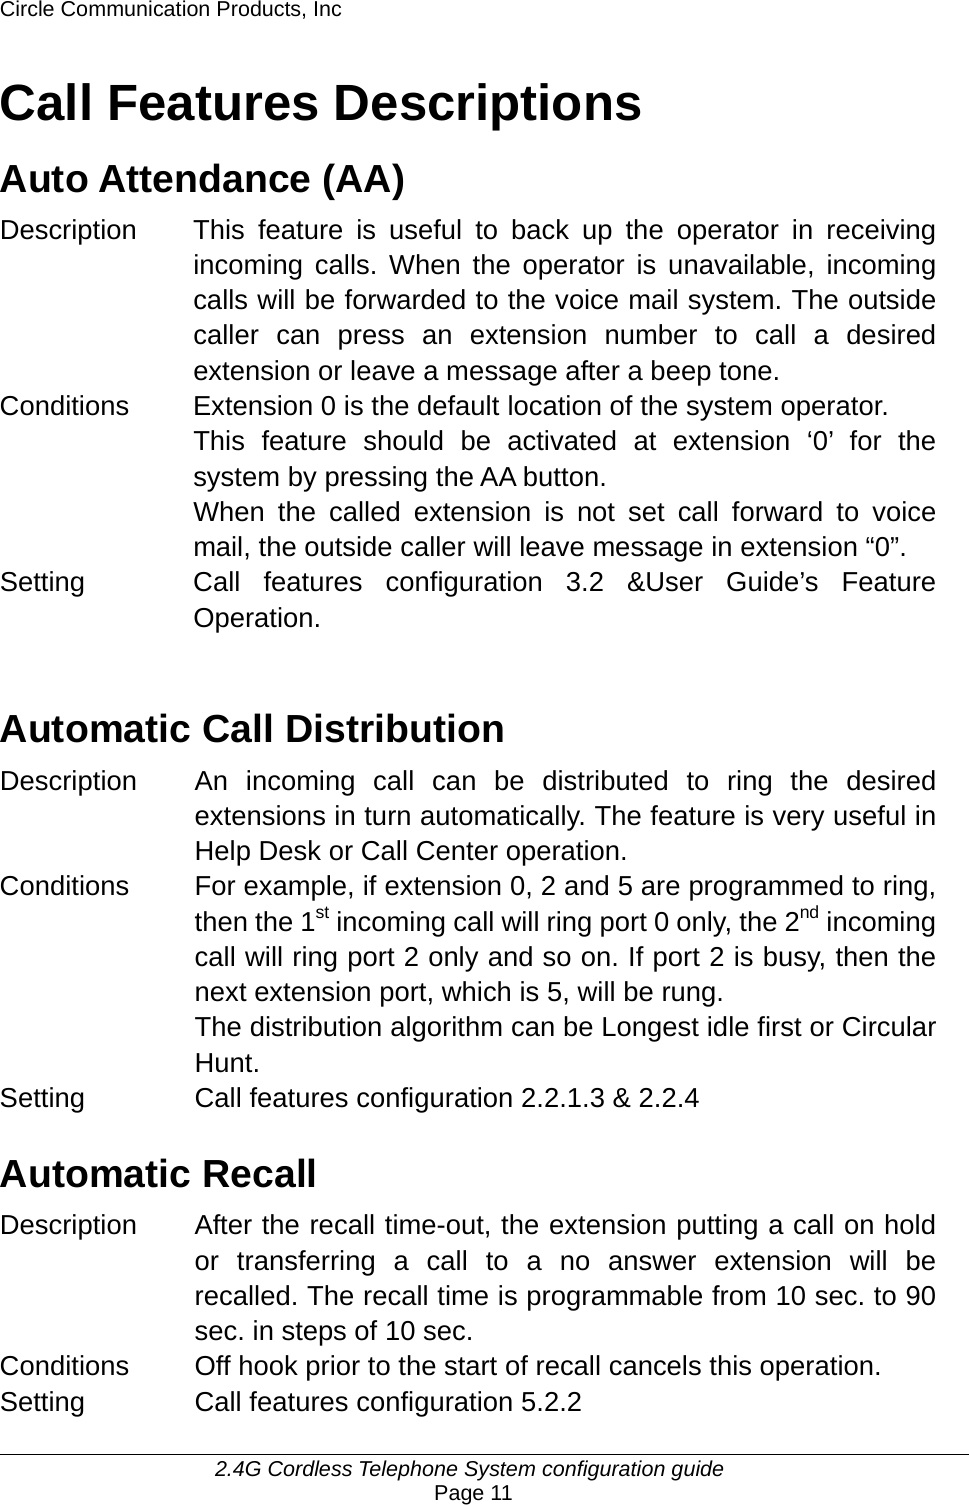 Circle Communication Products, Inc     2.4G Cordless Telephone System configuration guide Page 11 Call Features Descriptions Auto Attendance (AA) Description This feature is useful to back up the operator in receiving incoming calls. When the operator is unavailable, incoming calls will be forwarded to the voice mail system. The outside caller can press an extension number to call a desired extension or leave a message after a beep tone. Conditions  Extension 0 is the default location of the system operator. This feature should be activated at extension ‘0’ for the system by pressing the AA button. When the called extension is not set call forward to voice mail, the outside caller will leave message in extension “0”. Setting Call features configuration 3.2 &amp;User Guide’s Feature Operation.   Automatic Call Distribution Description  An incoming call can be distributed to ring the desired extensions in turn automatically. The feature is very useful in Help Desk or Call Center operation. Conditions  For example, if extension 0, 2 and 5 are programmed to ring, then the 1st incoming call will ring port 0 only, the 2nd incoming call will ring port 2 only and so on. If port 2 is busy, then the next extension port, which is 5, will be rung. The distribution algorithm can be Longest idle first or Circular Hunt. Setting  Call features configuration 2.2.1.3 &amp; 2.2.4  Automatic Recall Description After the recall time-out, the extension putting a call on hold or transferring a call to a no answer extension will be recalled. The recall time is programmable from 10 sec. to 90 sec. in steps of 10 sec. Conditions  Off hook prior to the start of recall cancels this operation. Setting  Call features configuration 5.2.2 